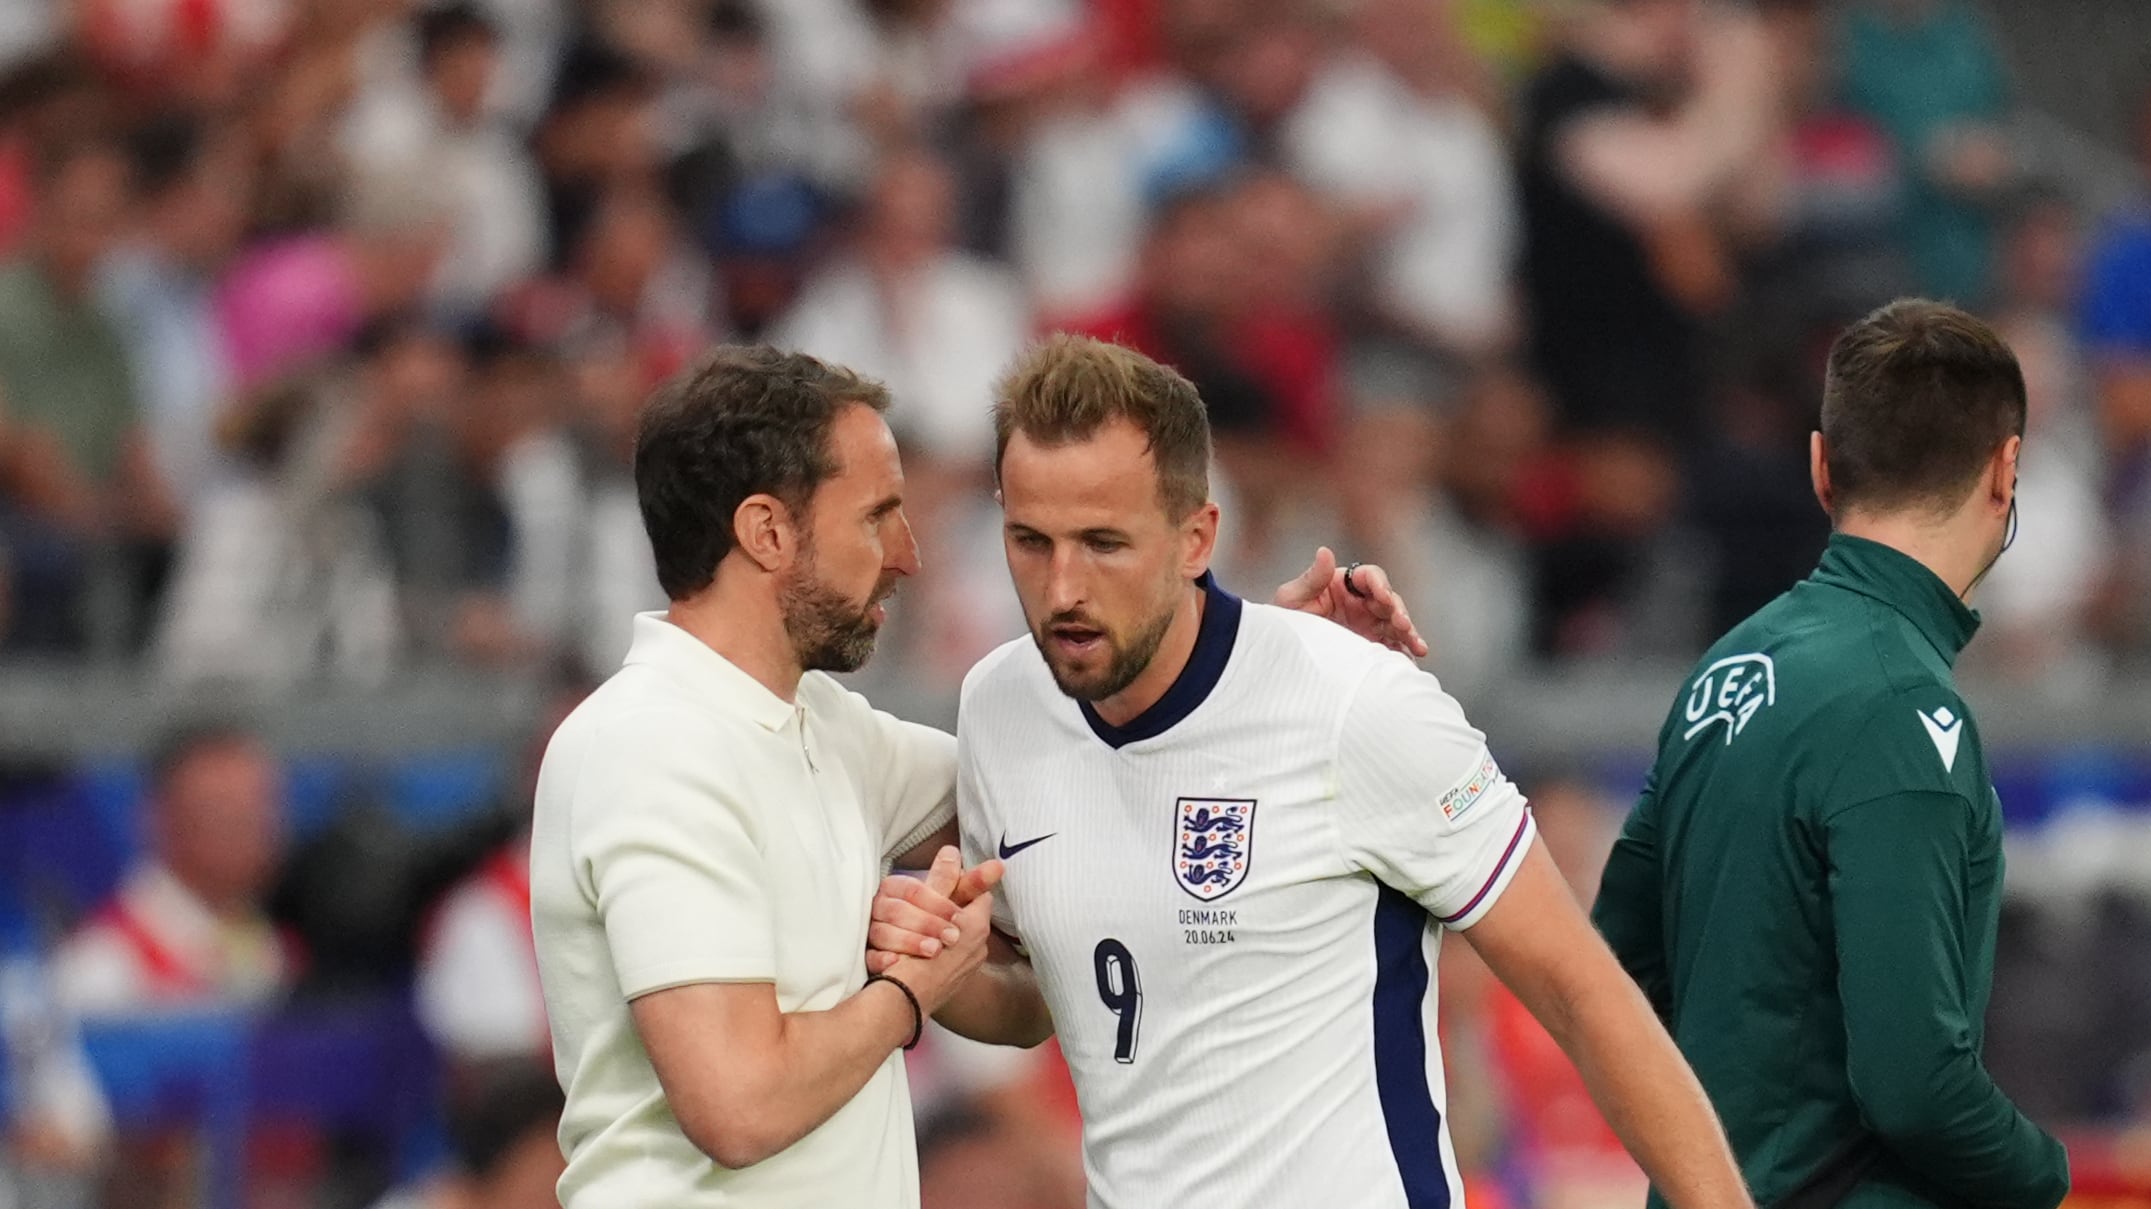 England’s Harry Kane shakes hands with manager Gareth Southgate after being substituted against Denmark.